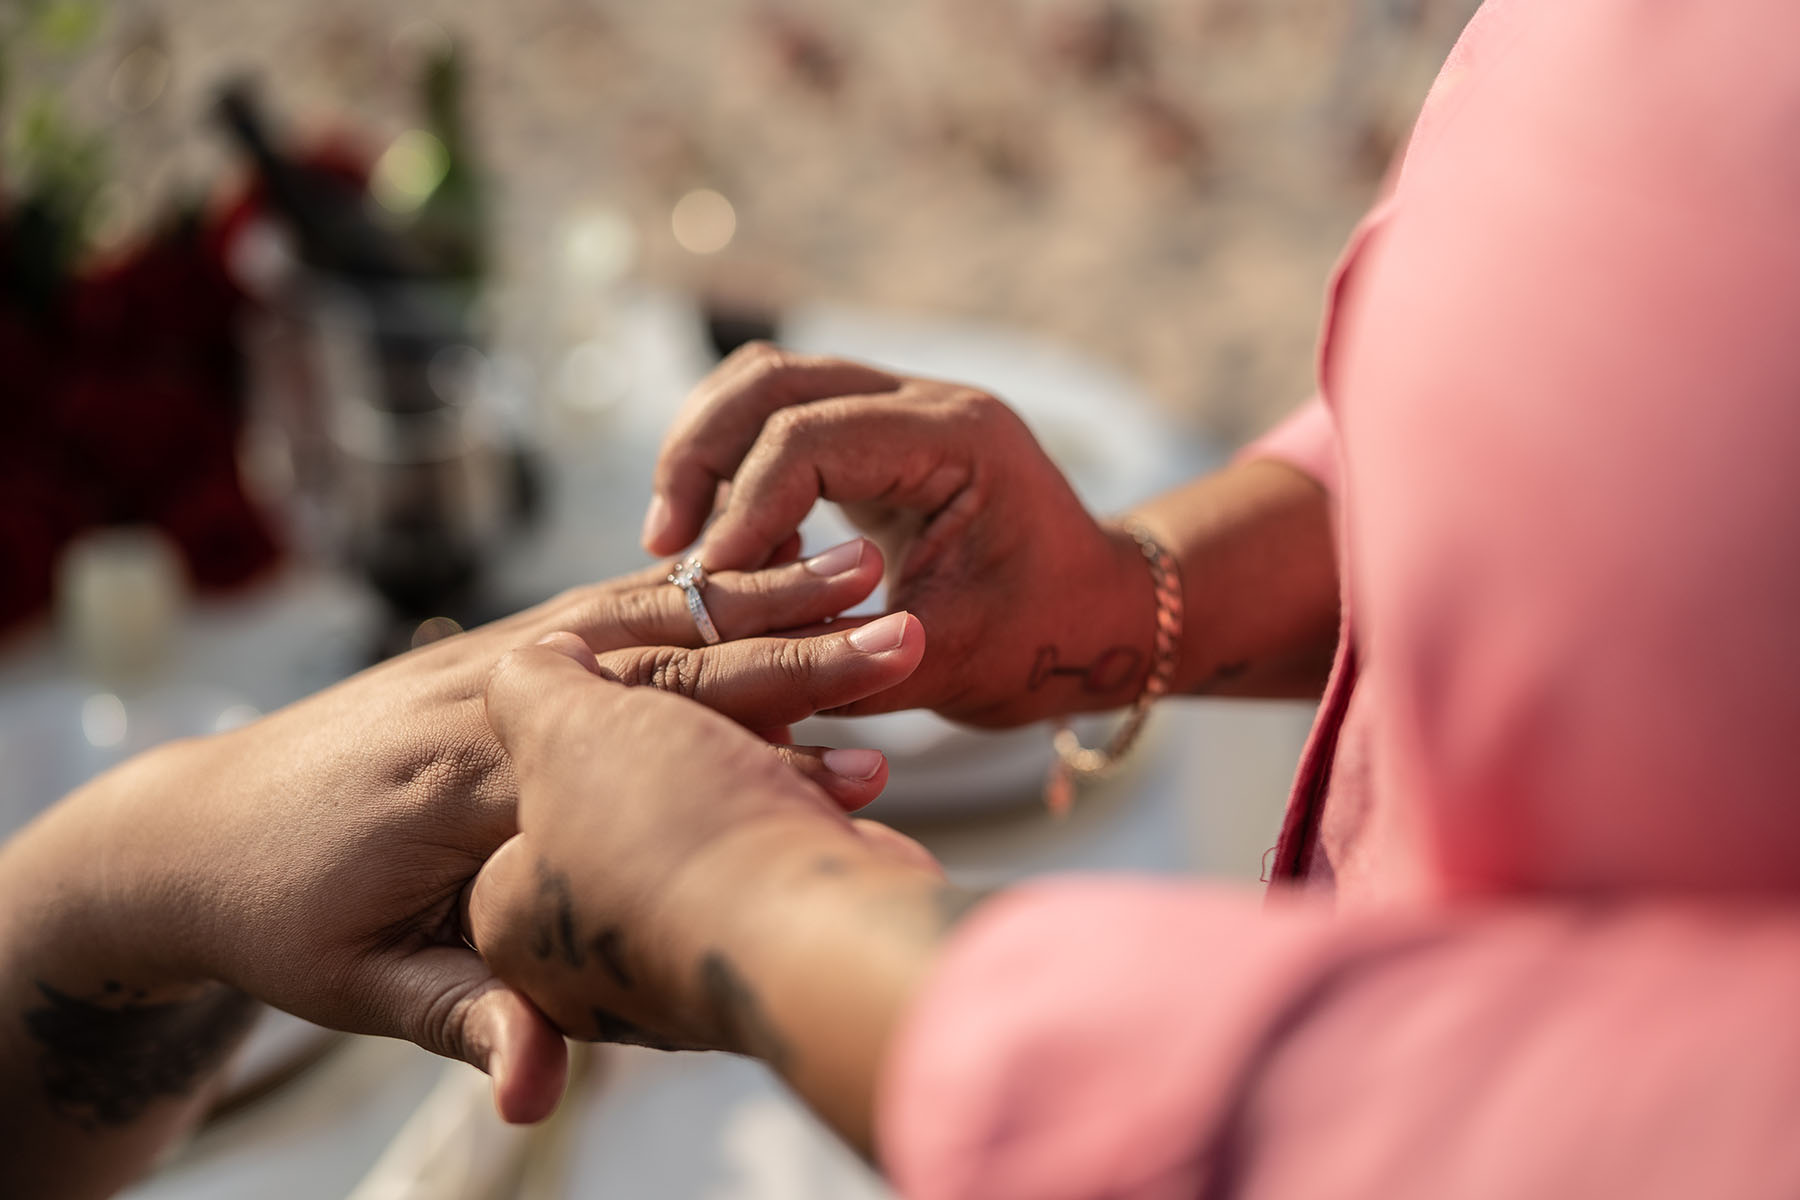 A woman puts a ring on her girlfriend after proposing to her on the beach.